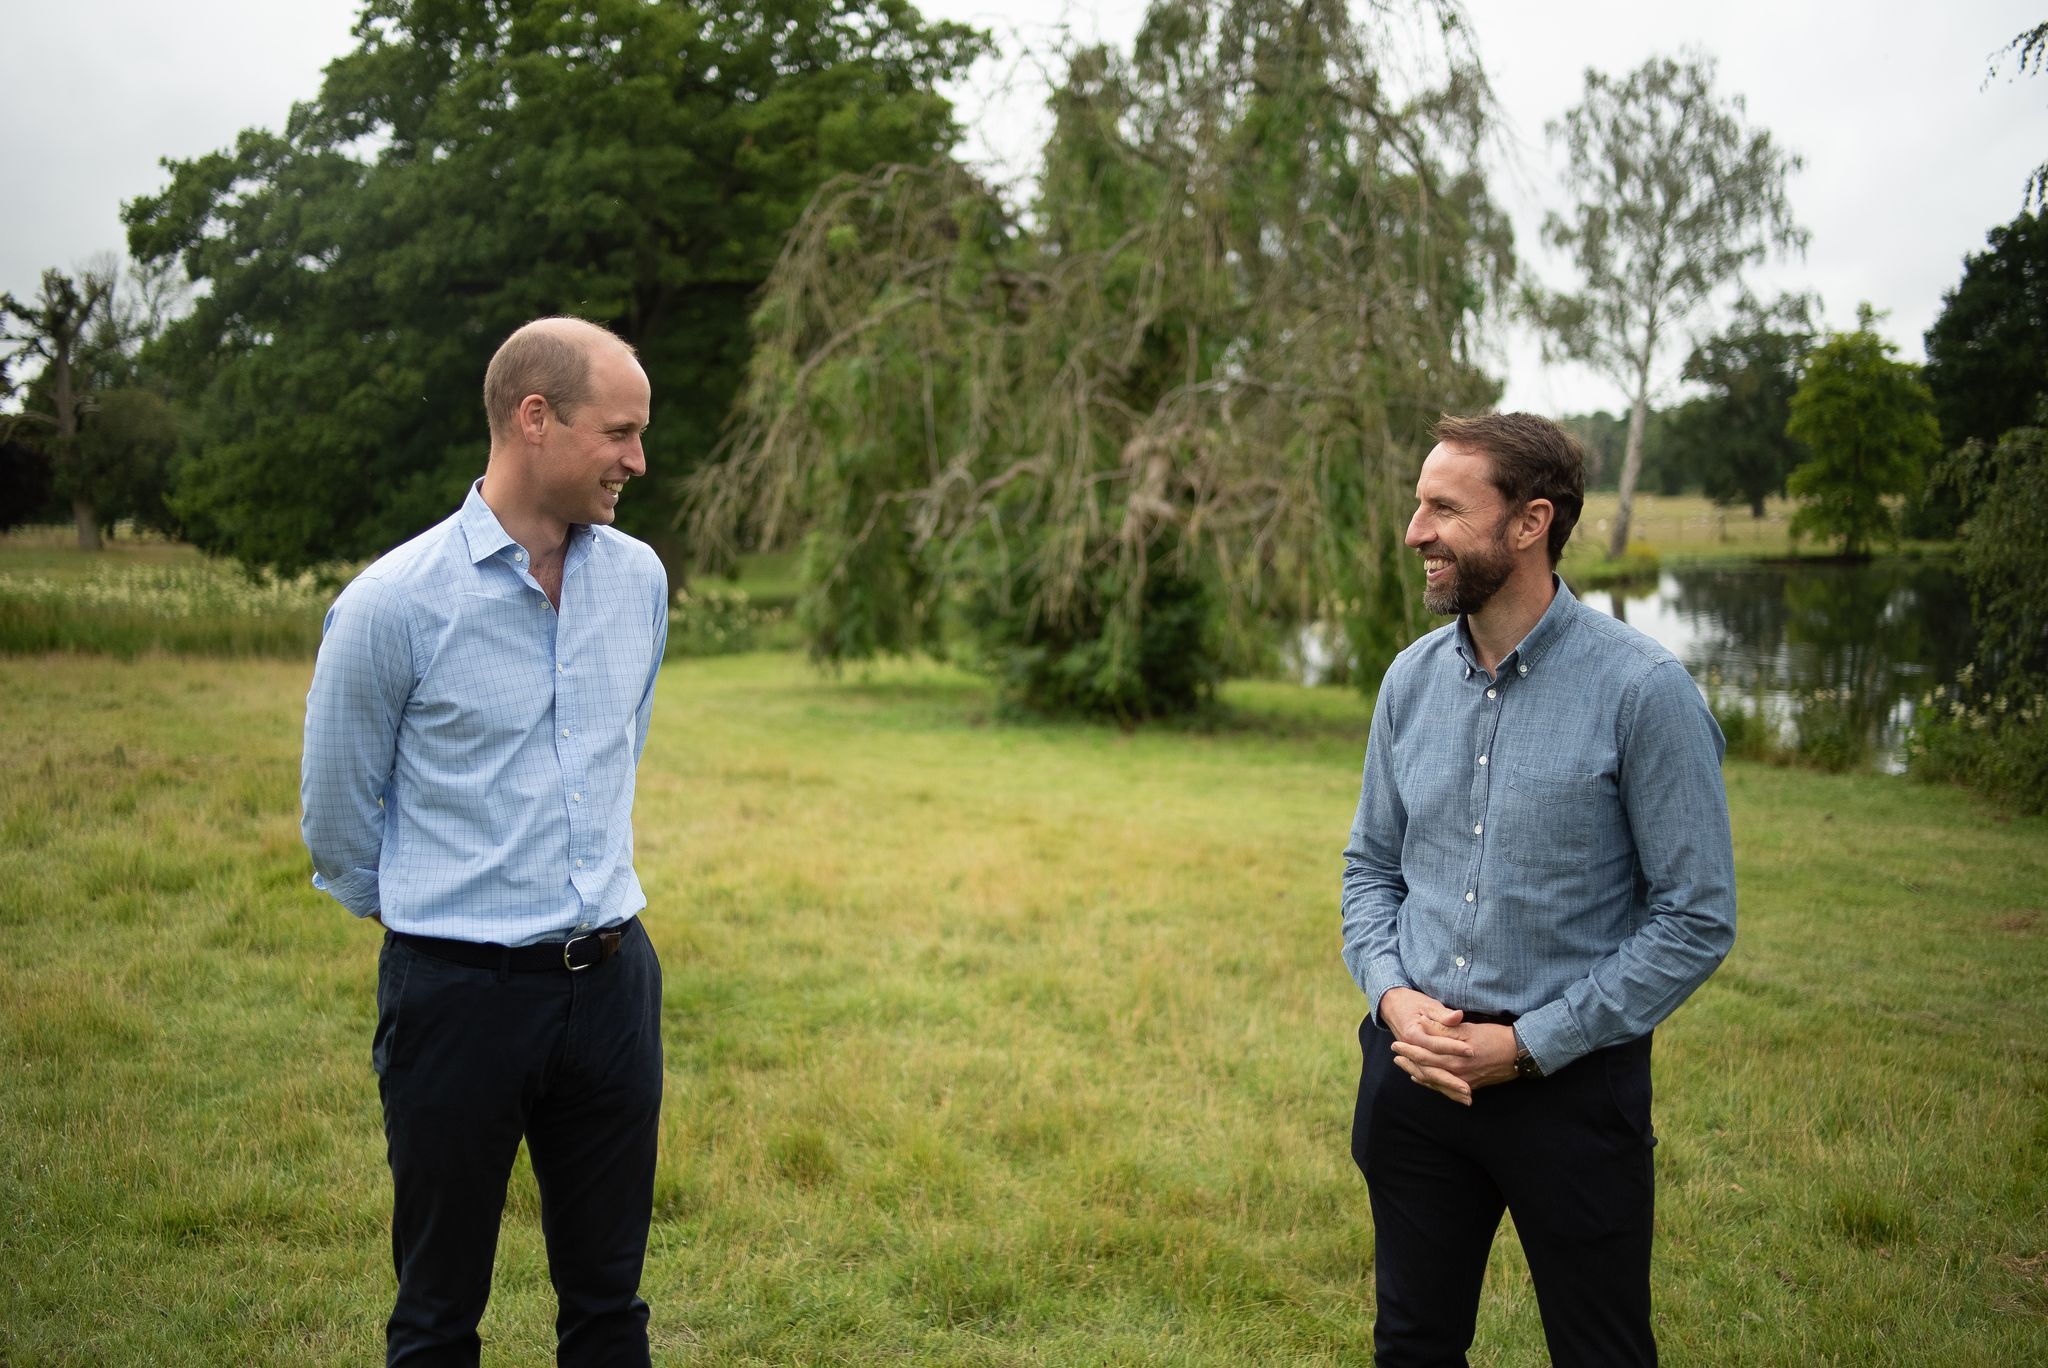 England manager Gareth Southgate spoke to the Duke of Cambridge as part of the Heads Up campaign's #SoundofSupport series 